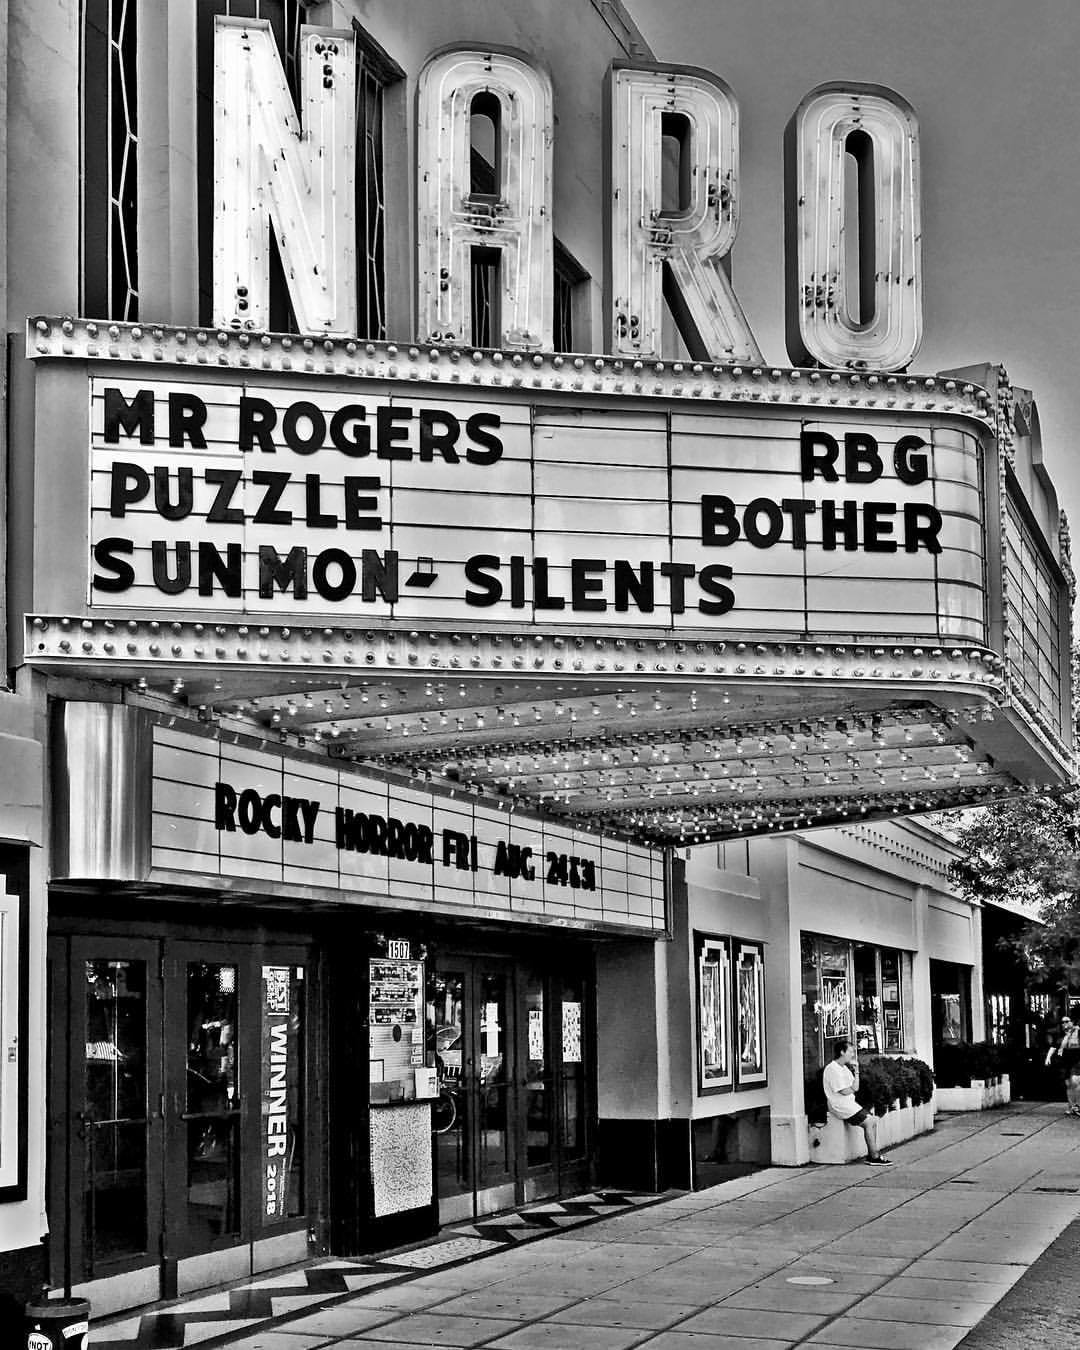 CIOPhoto — Day 283 of 365 - The Naro Expanded Cinema in...